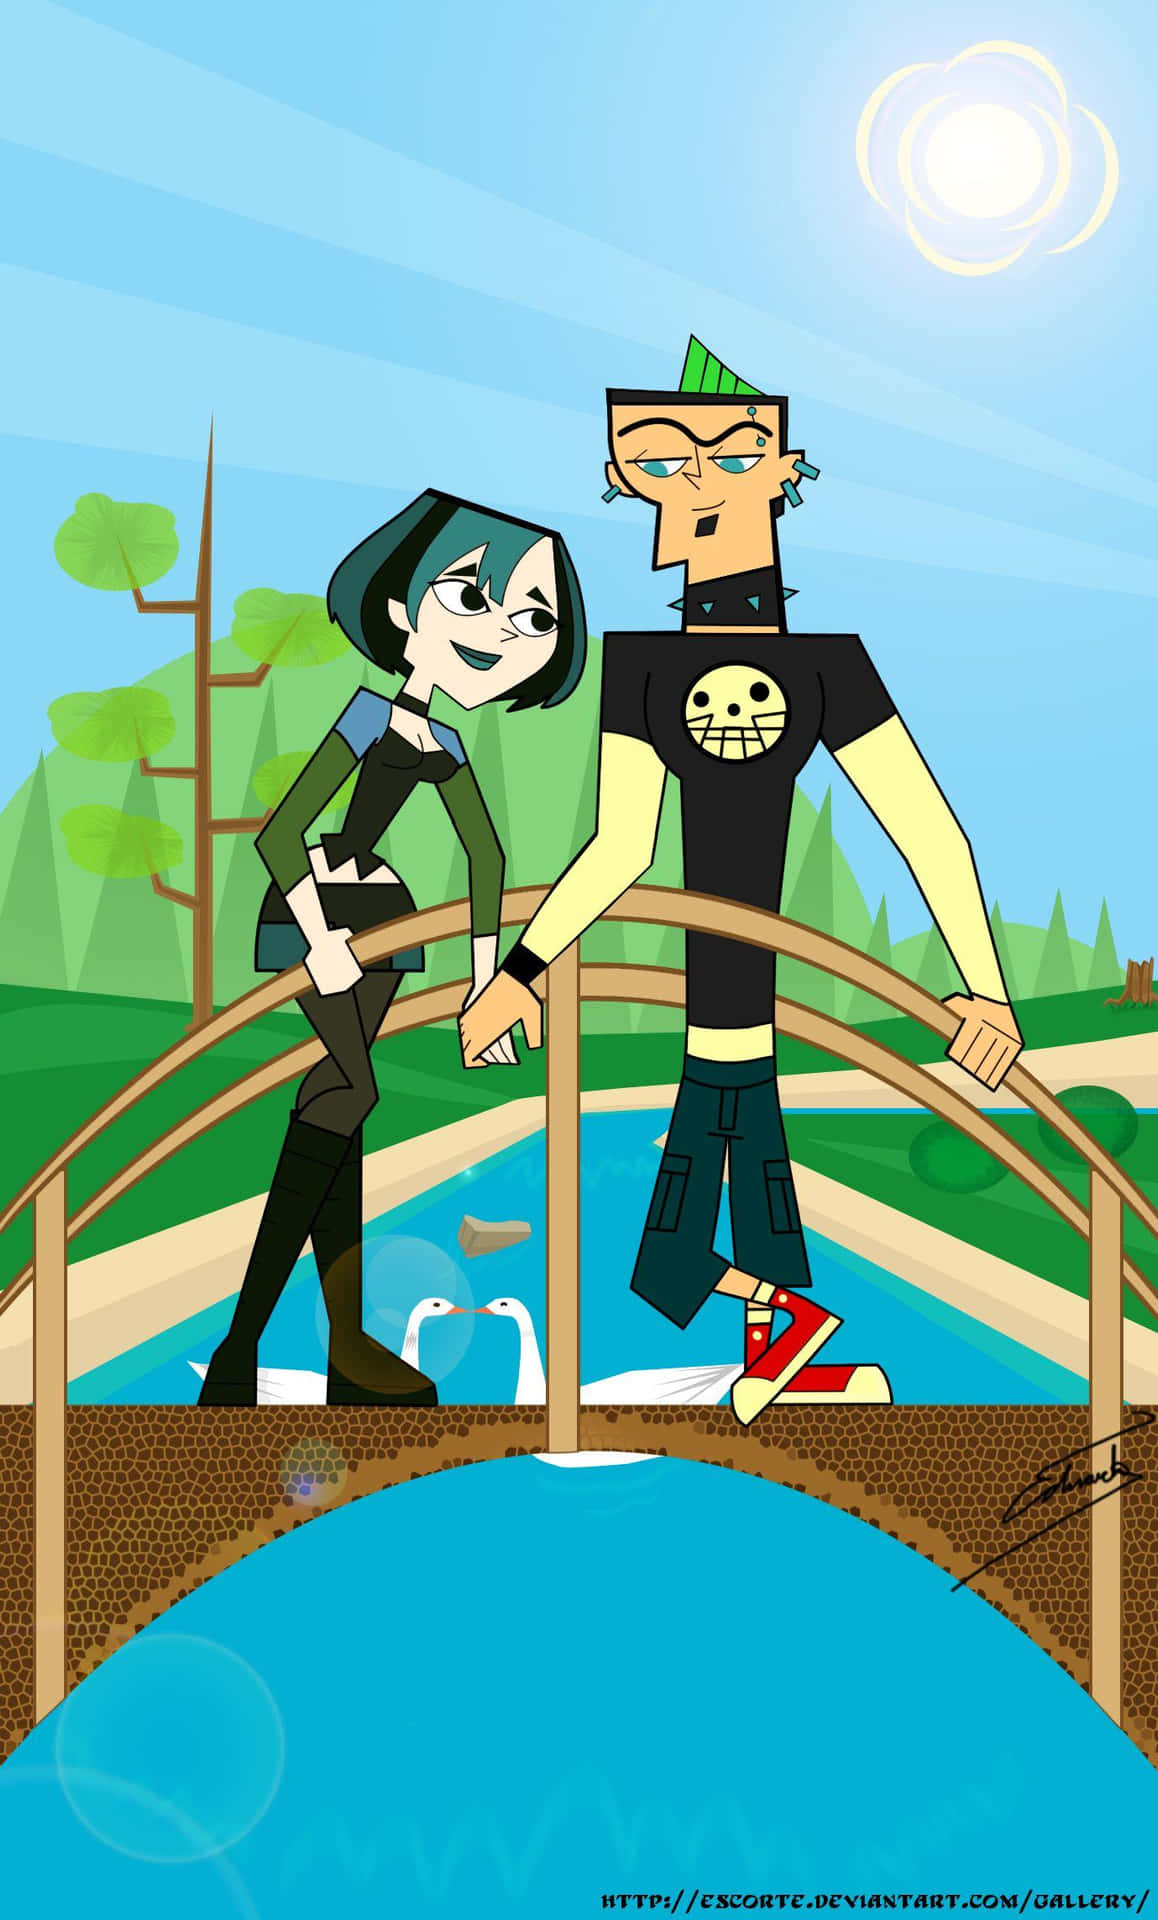 Welcome to the wild world of Total Drama!